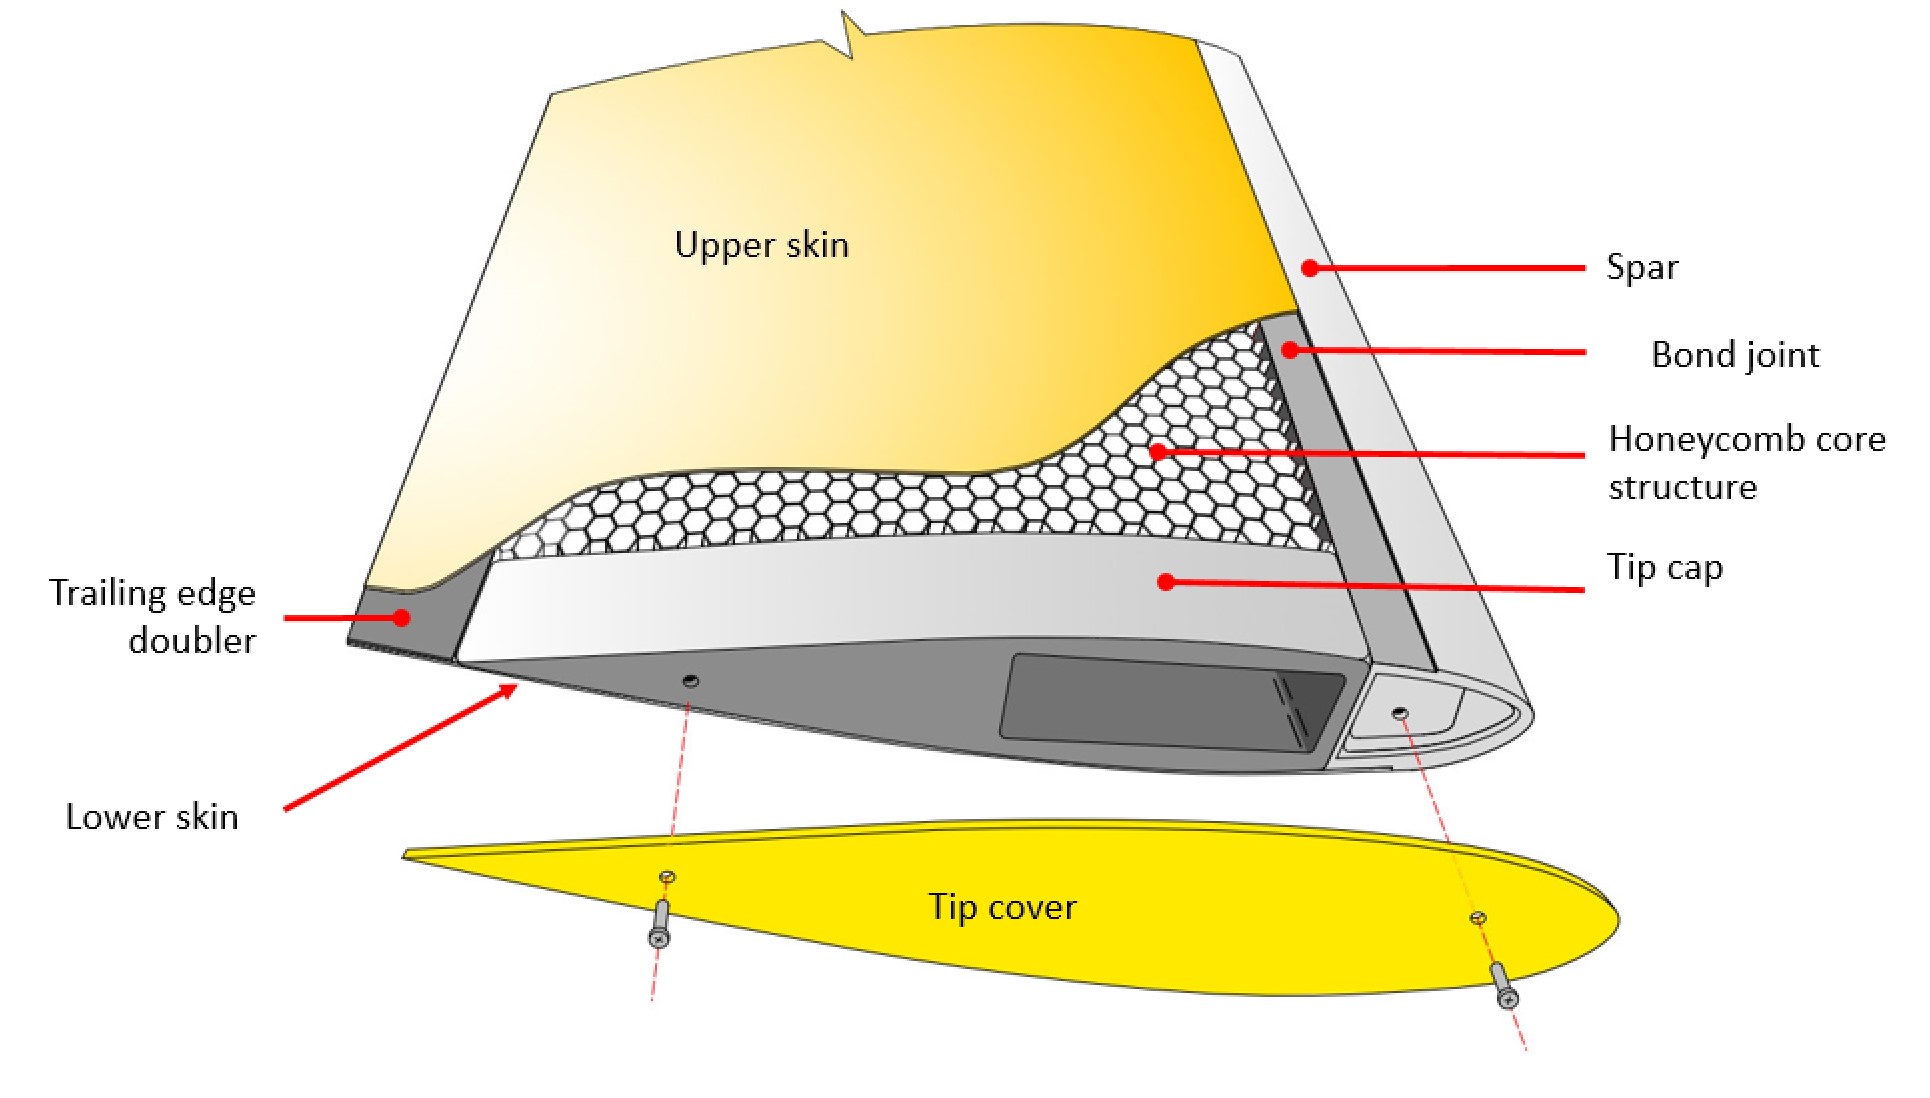 Components of a C016-2 main rotor blade (Source: TSB)